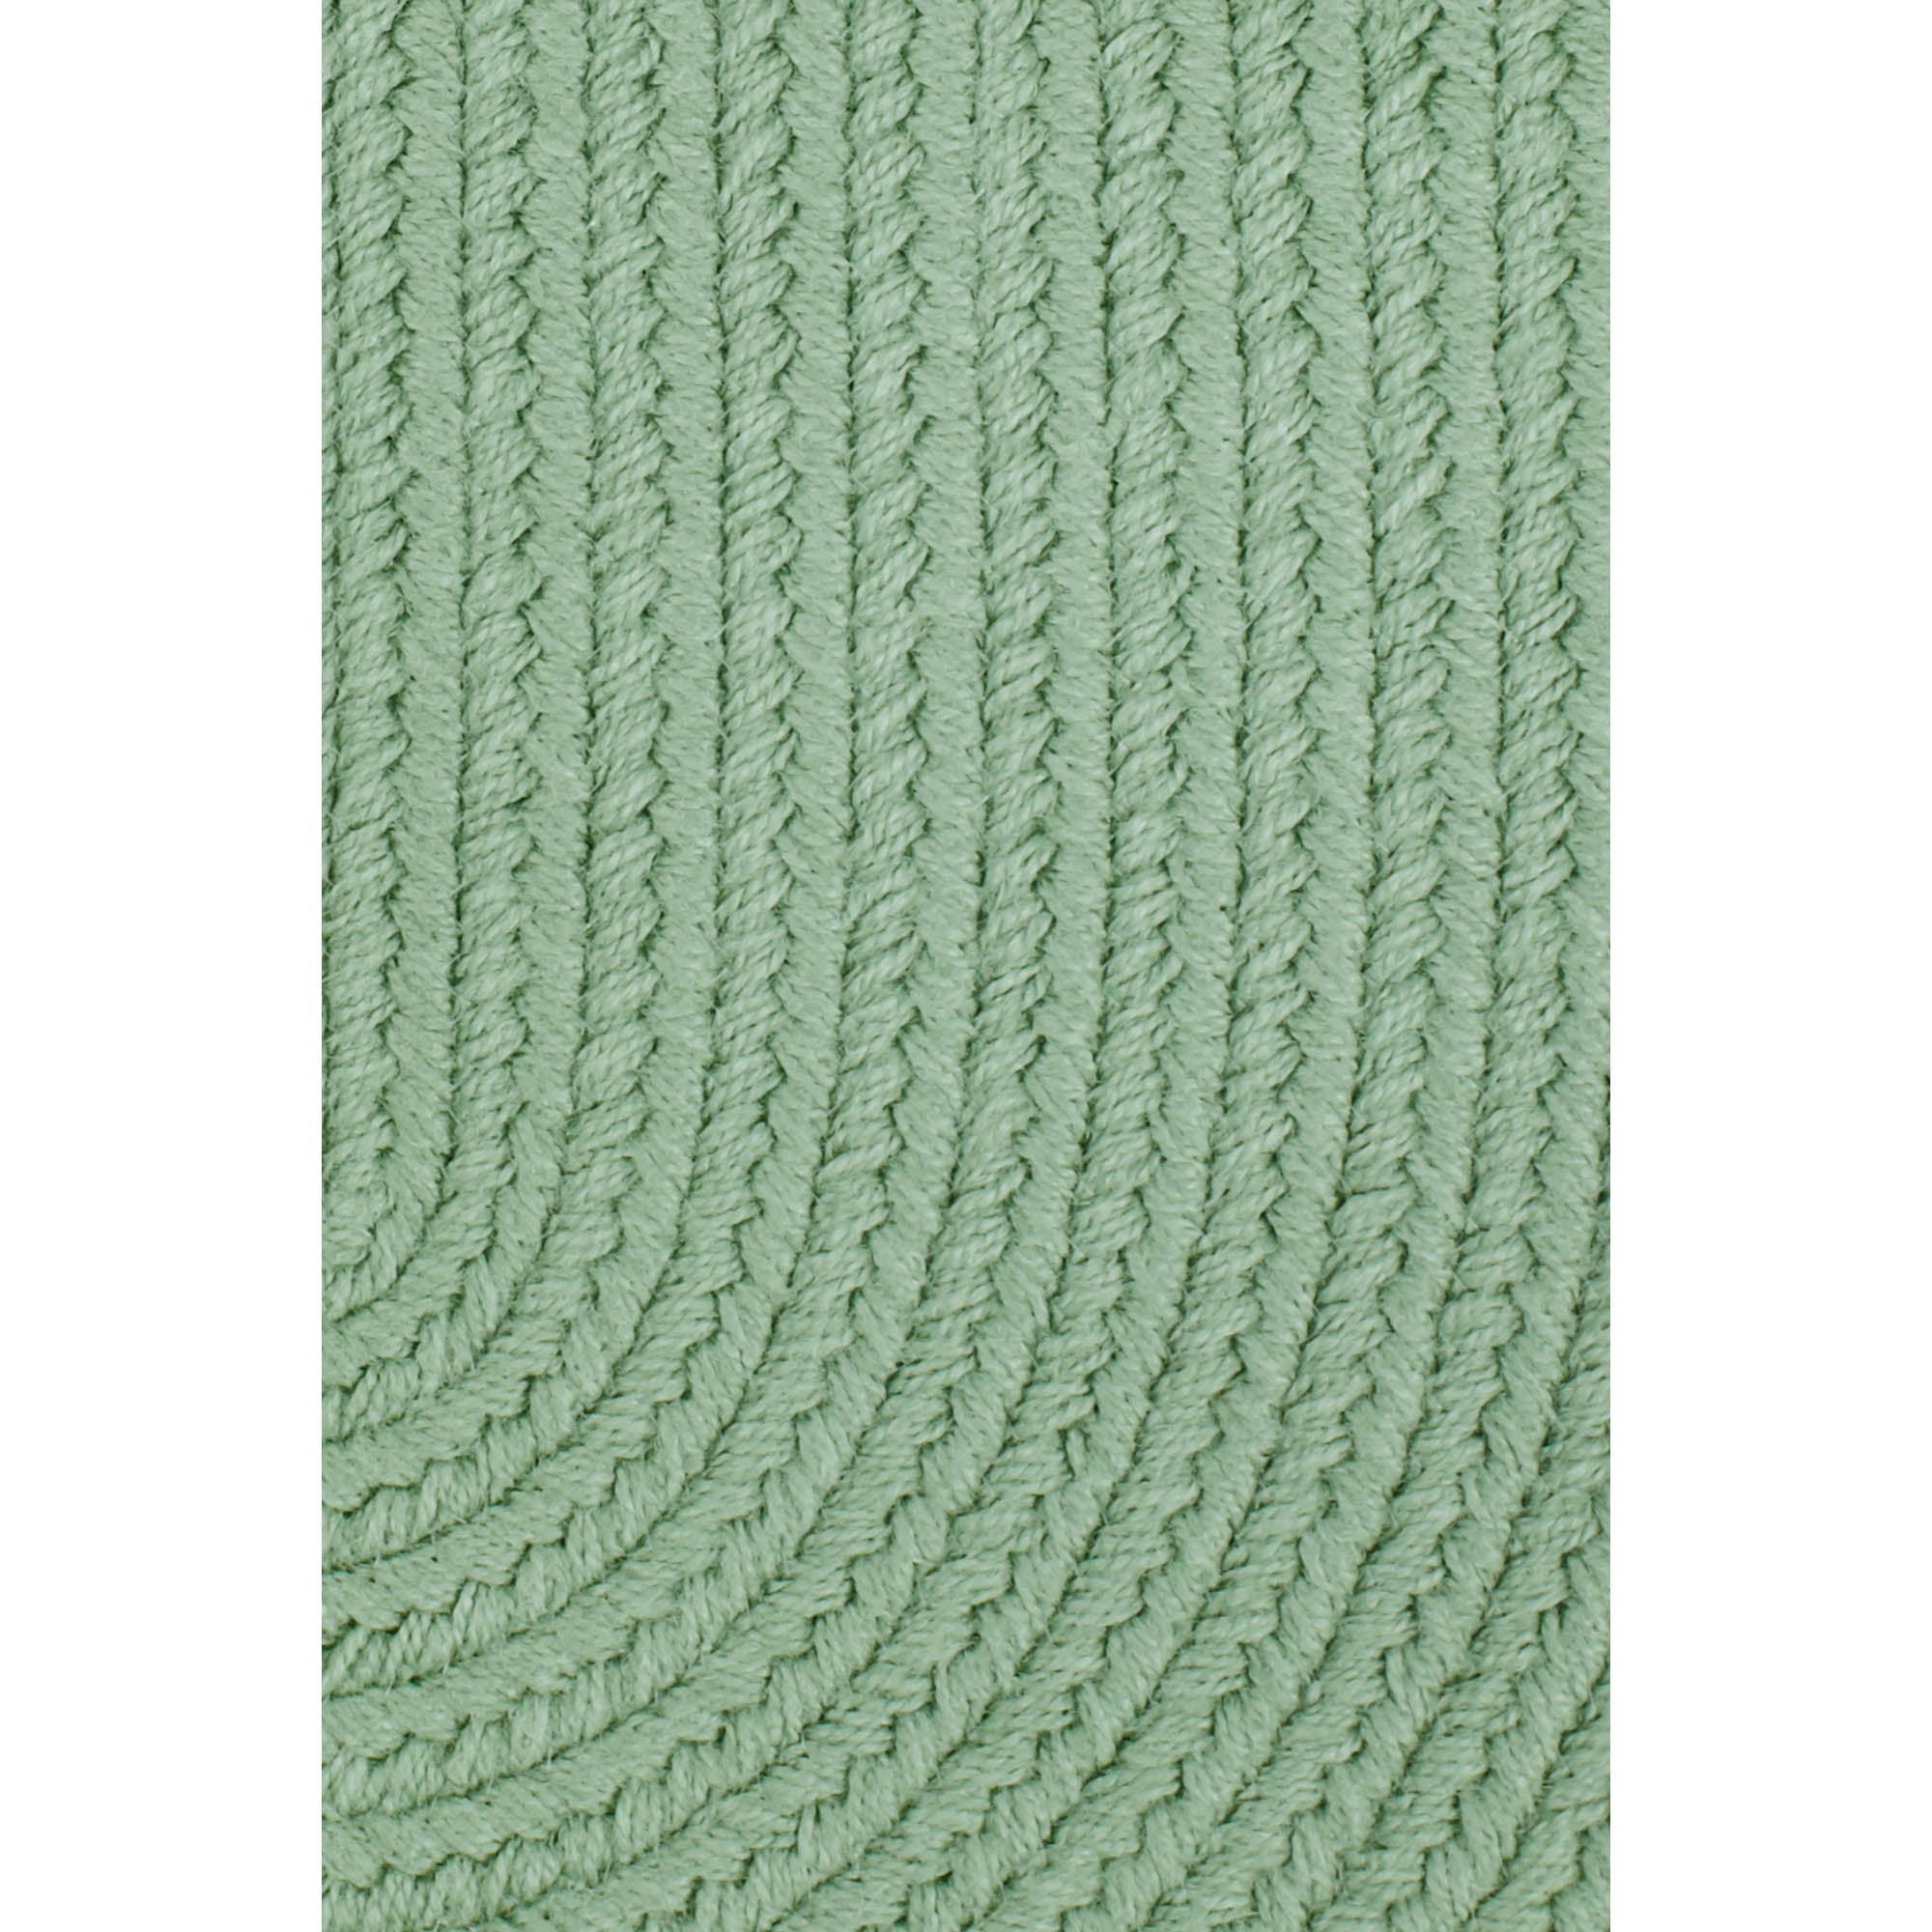 Maui Braided Ultra Durable Outdoor Rug #color_celadon green